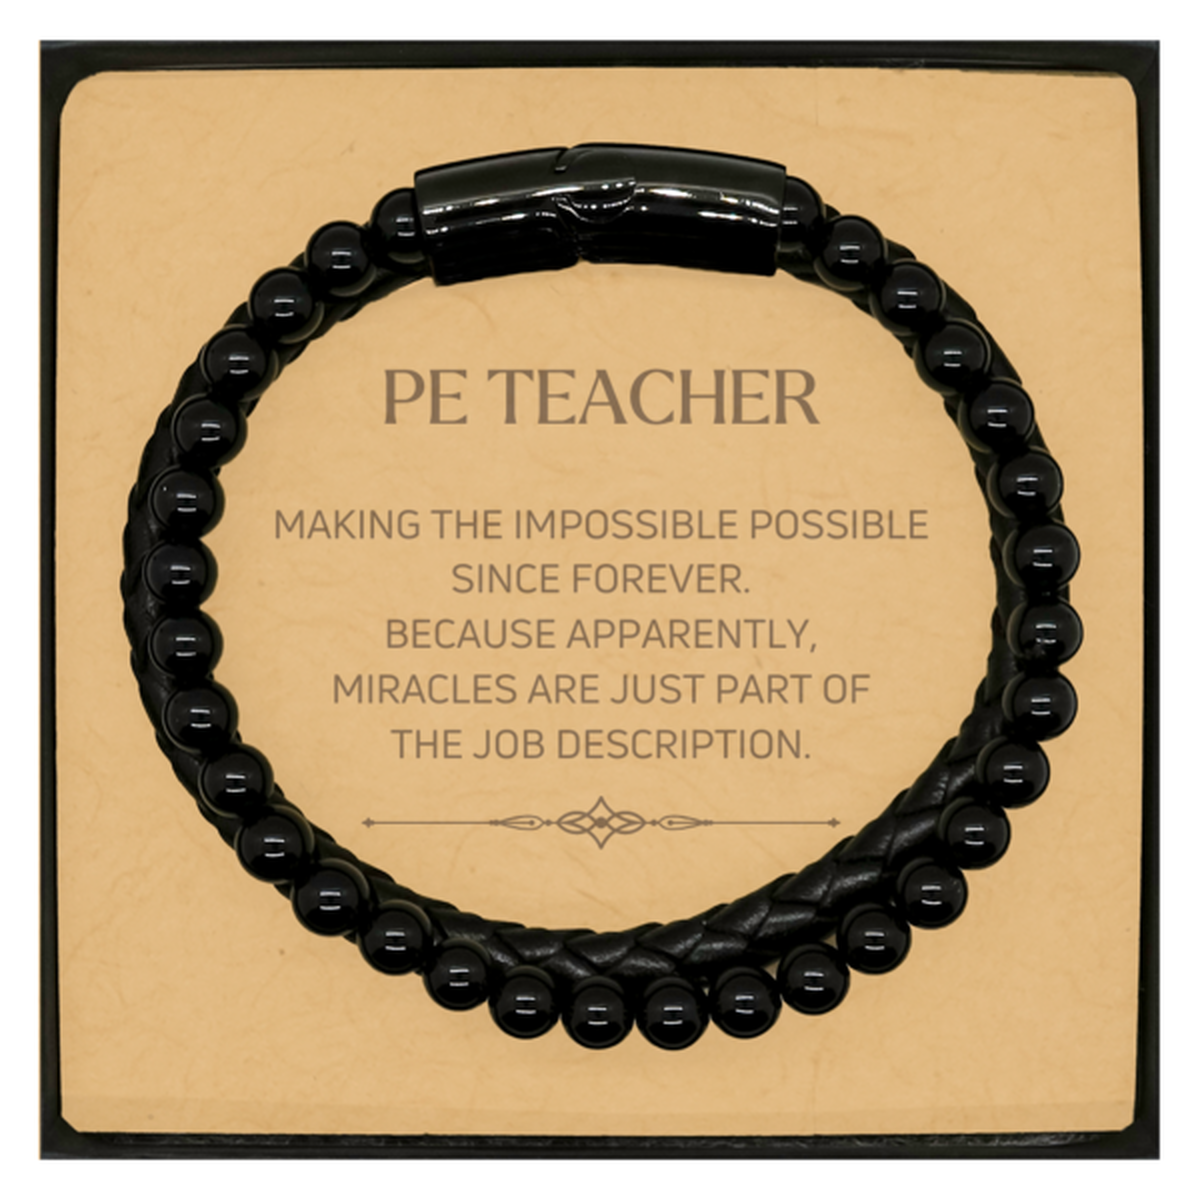 Funny PE Teacher Gifts, Miracles are just part of the job description, Inspirational Birthday Christmas Stone Leather Bracelets For PE Teacher, Men, Women, Coworkers, Friends, Boss